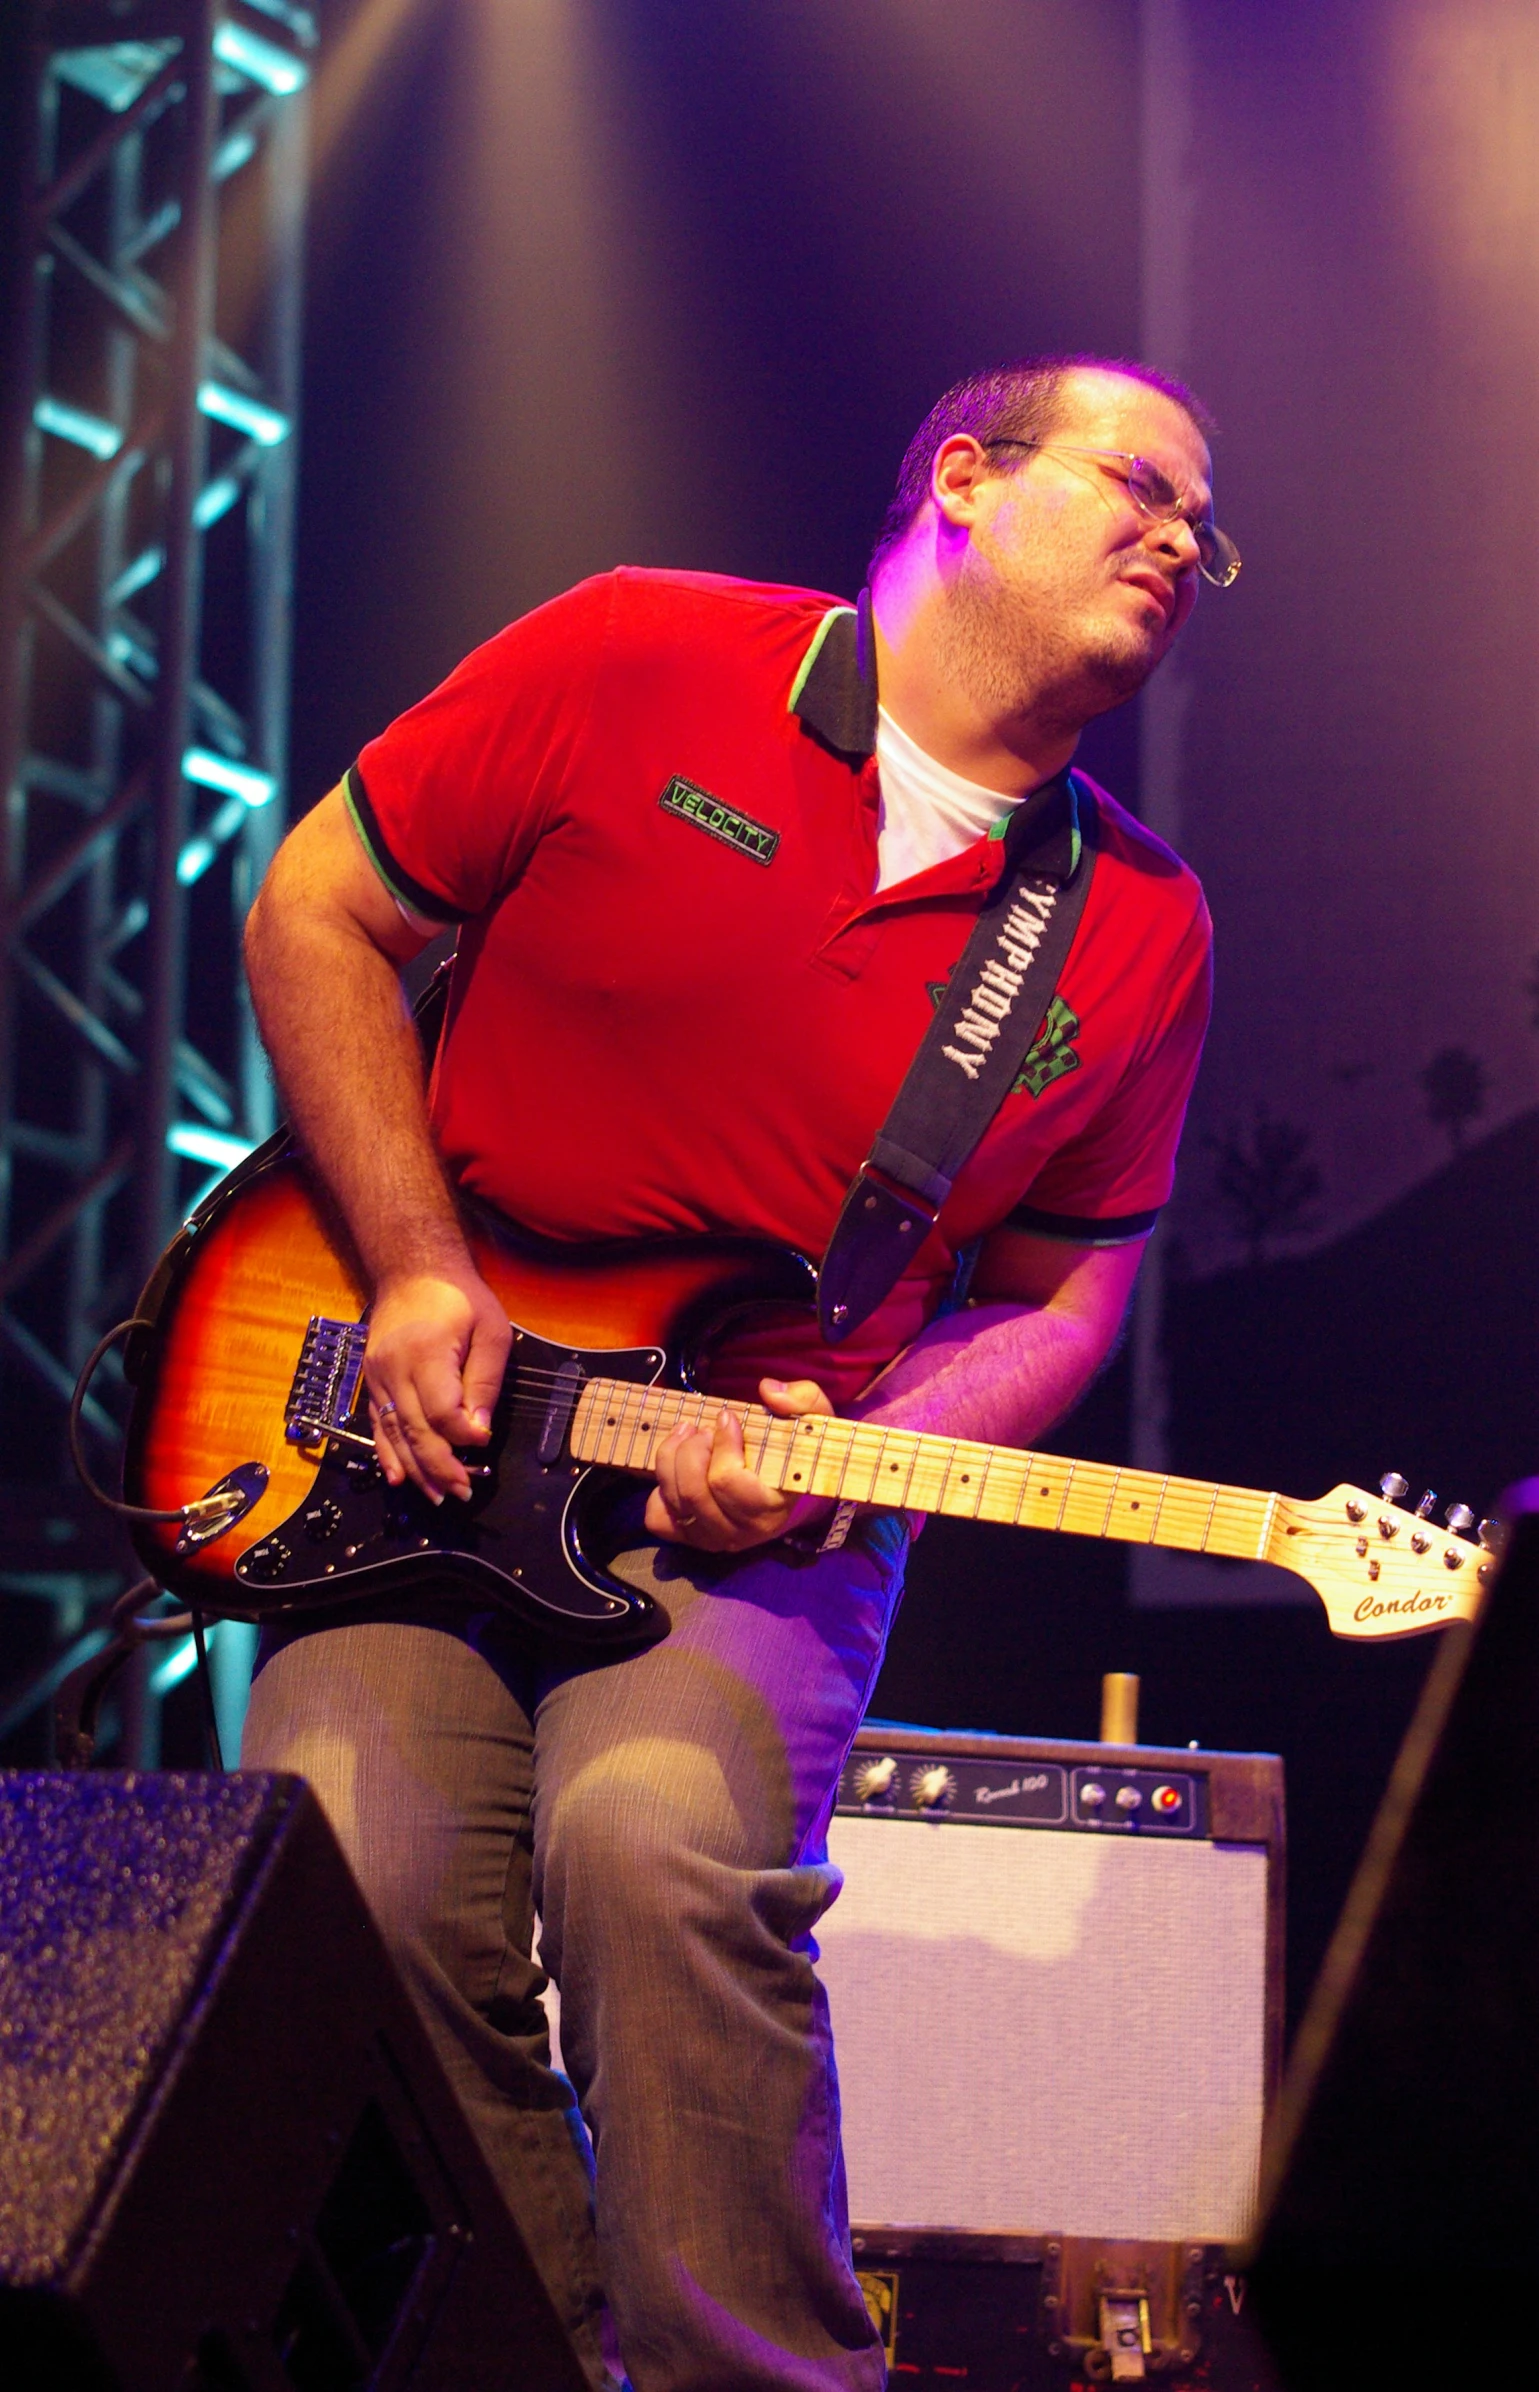 a man playing a guitar while standing on stage